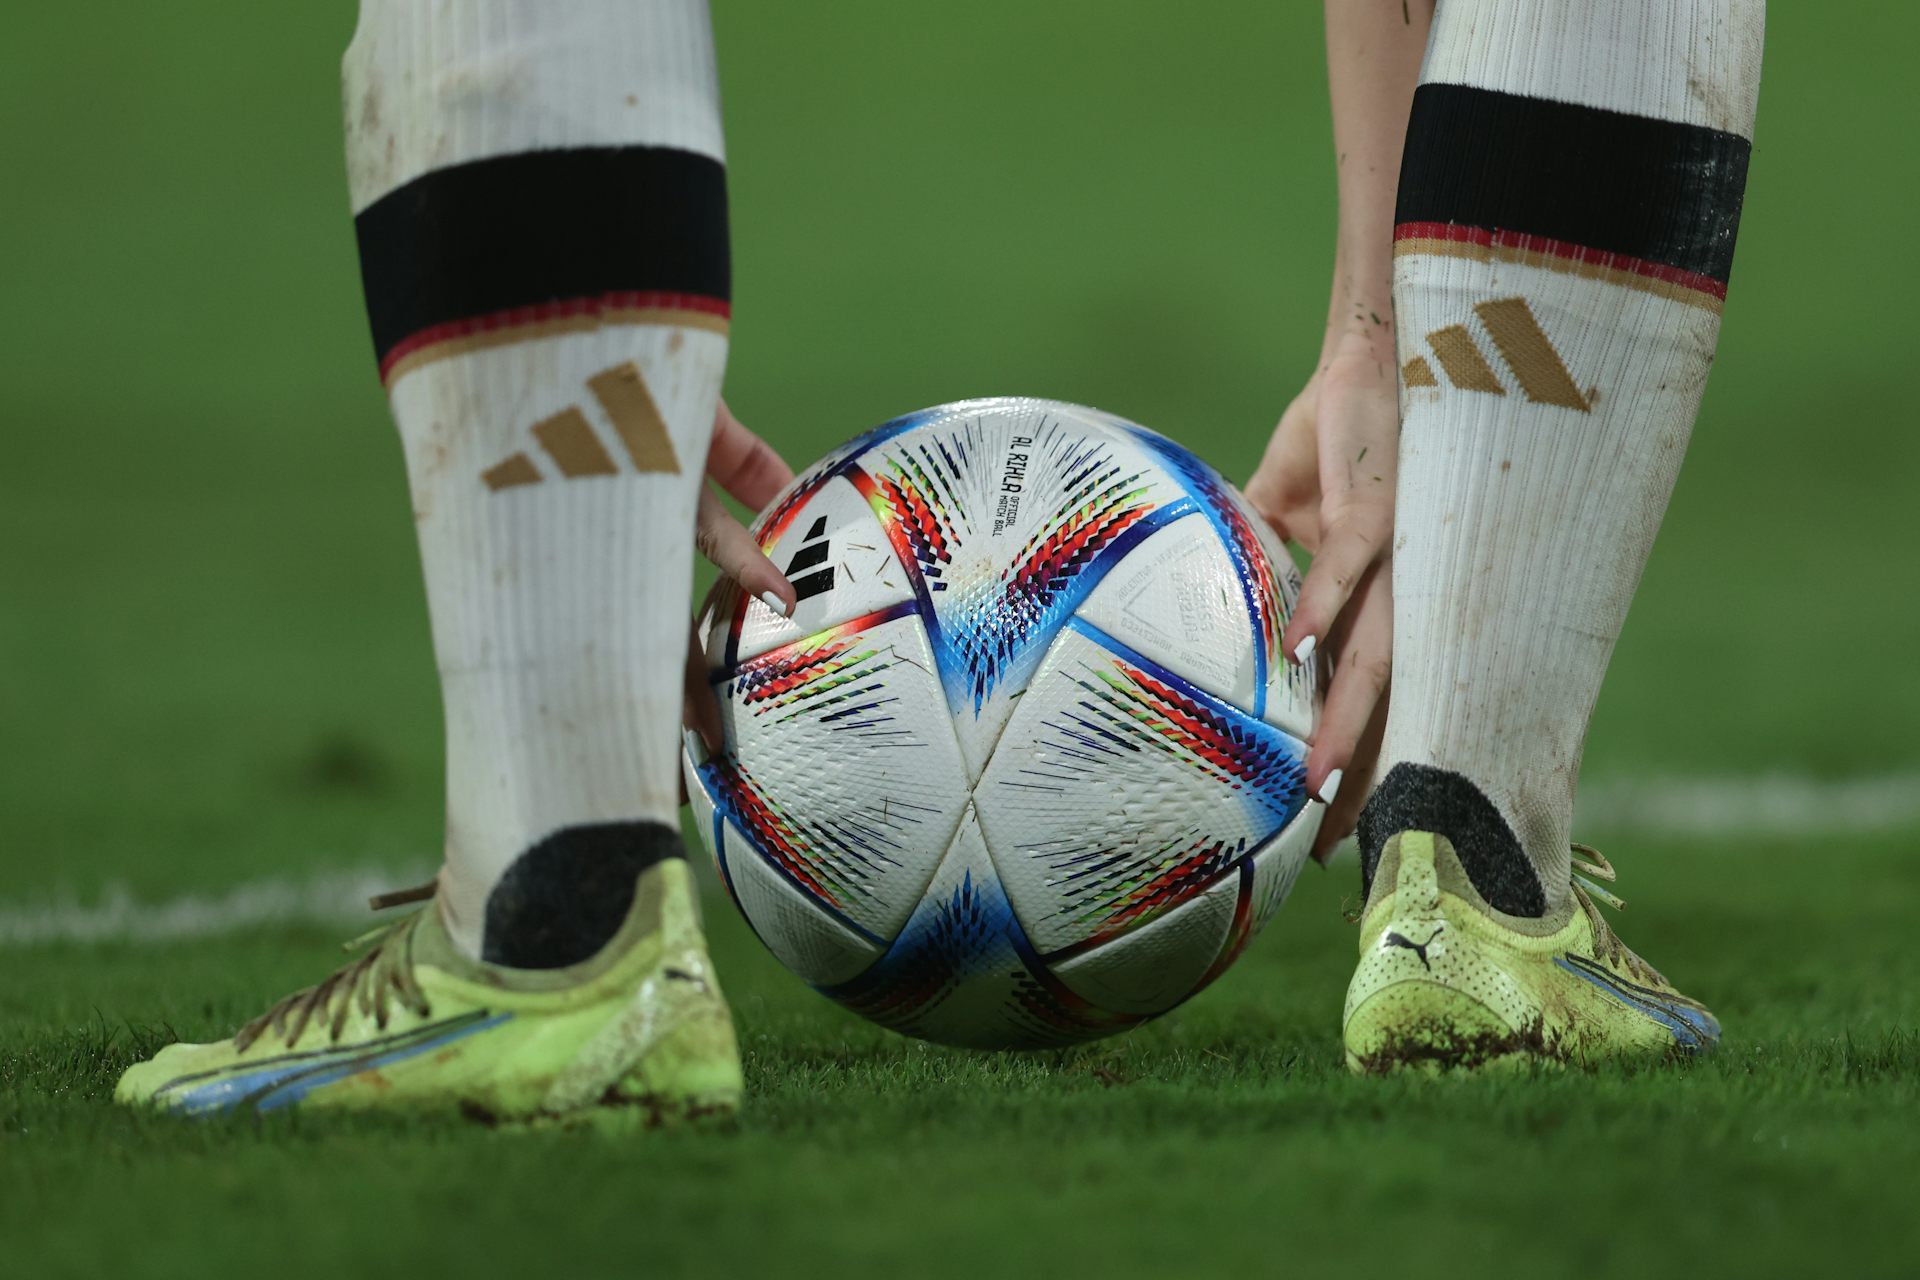 World Cup: This year's special Al Rihla ball has the aerodynamics